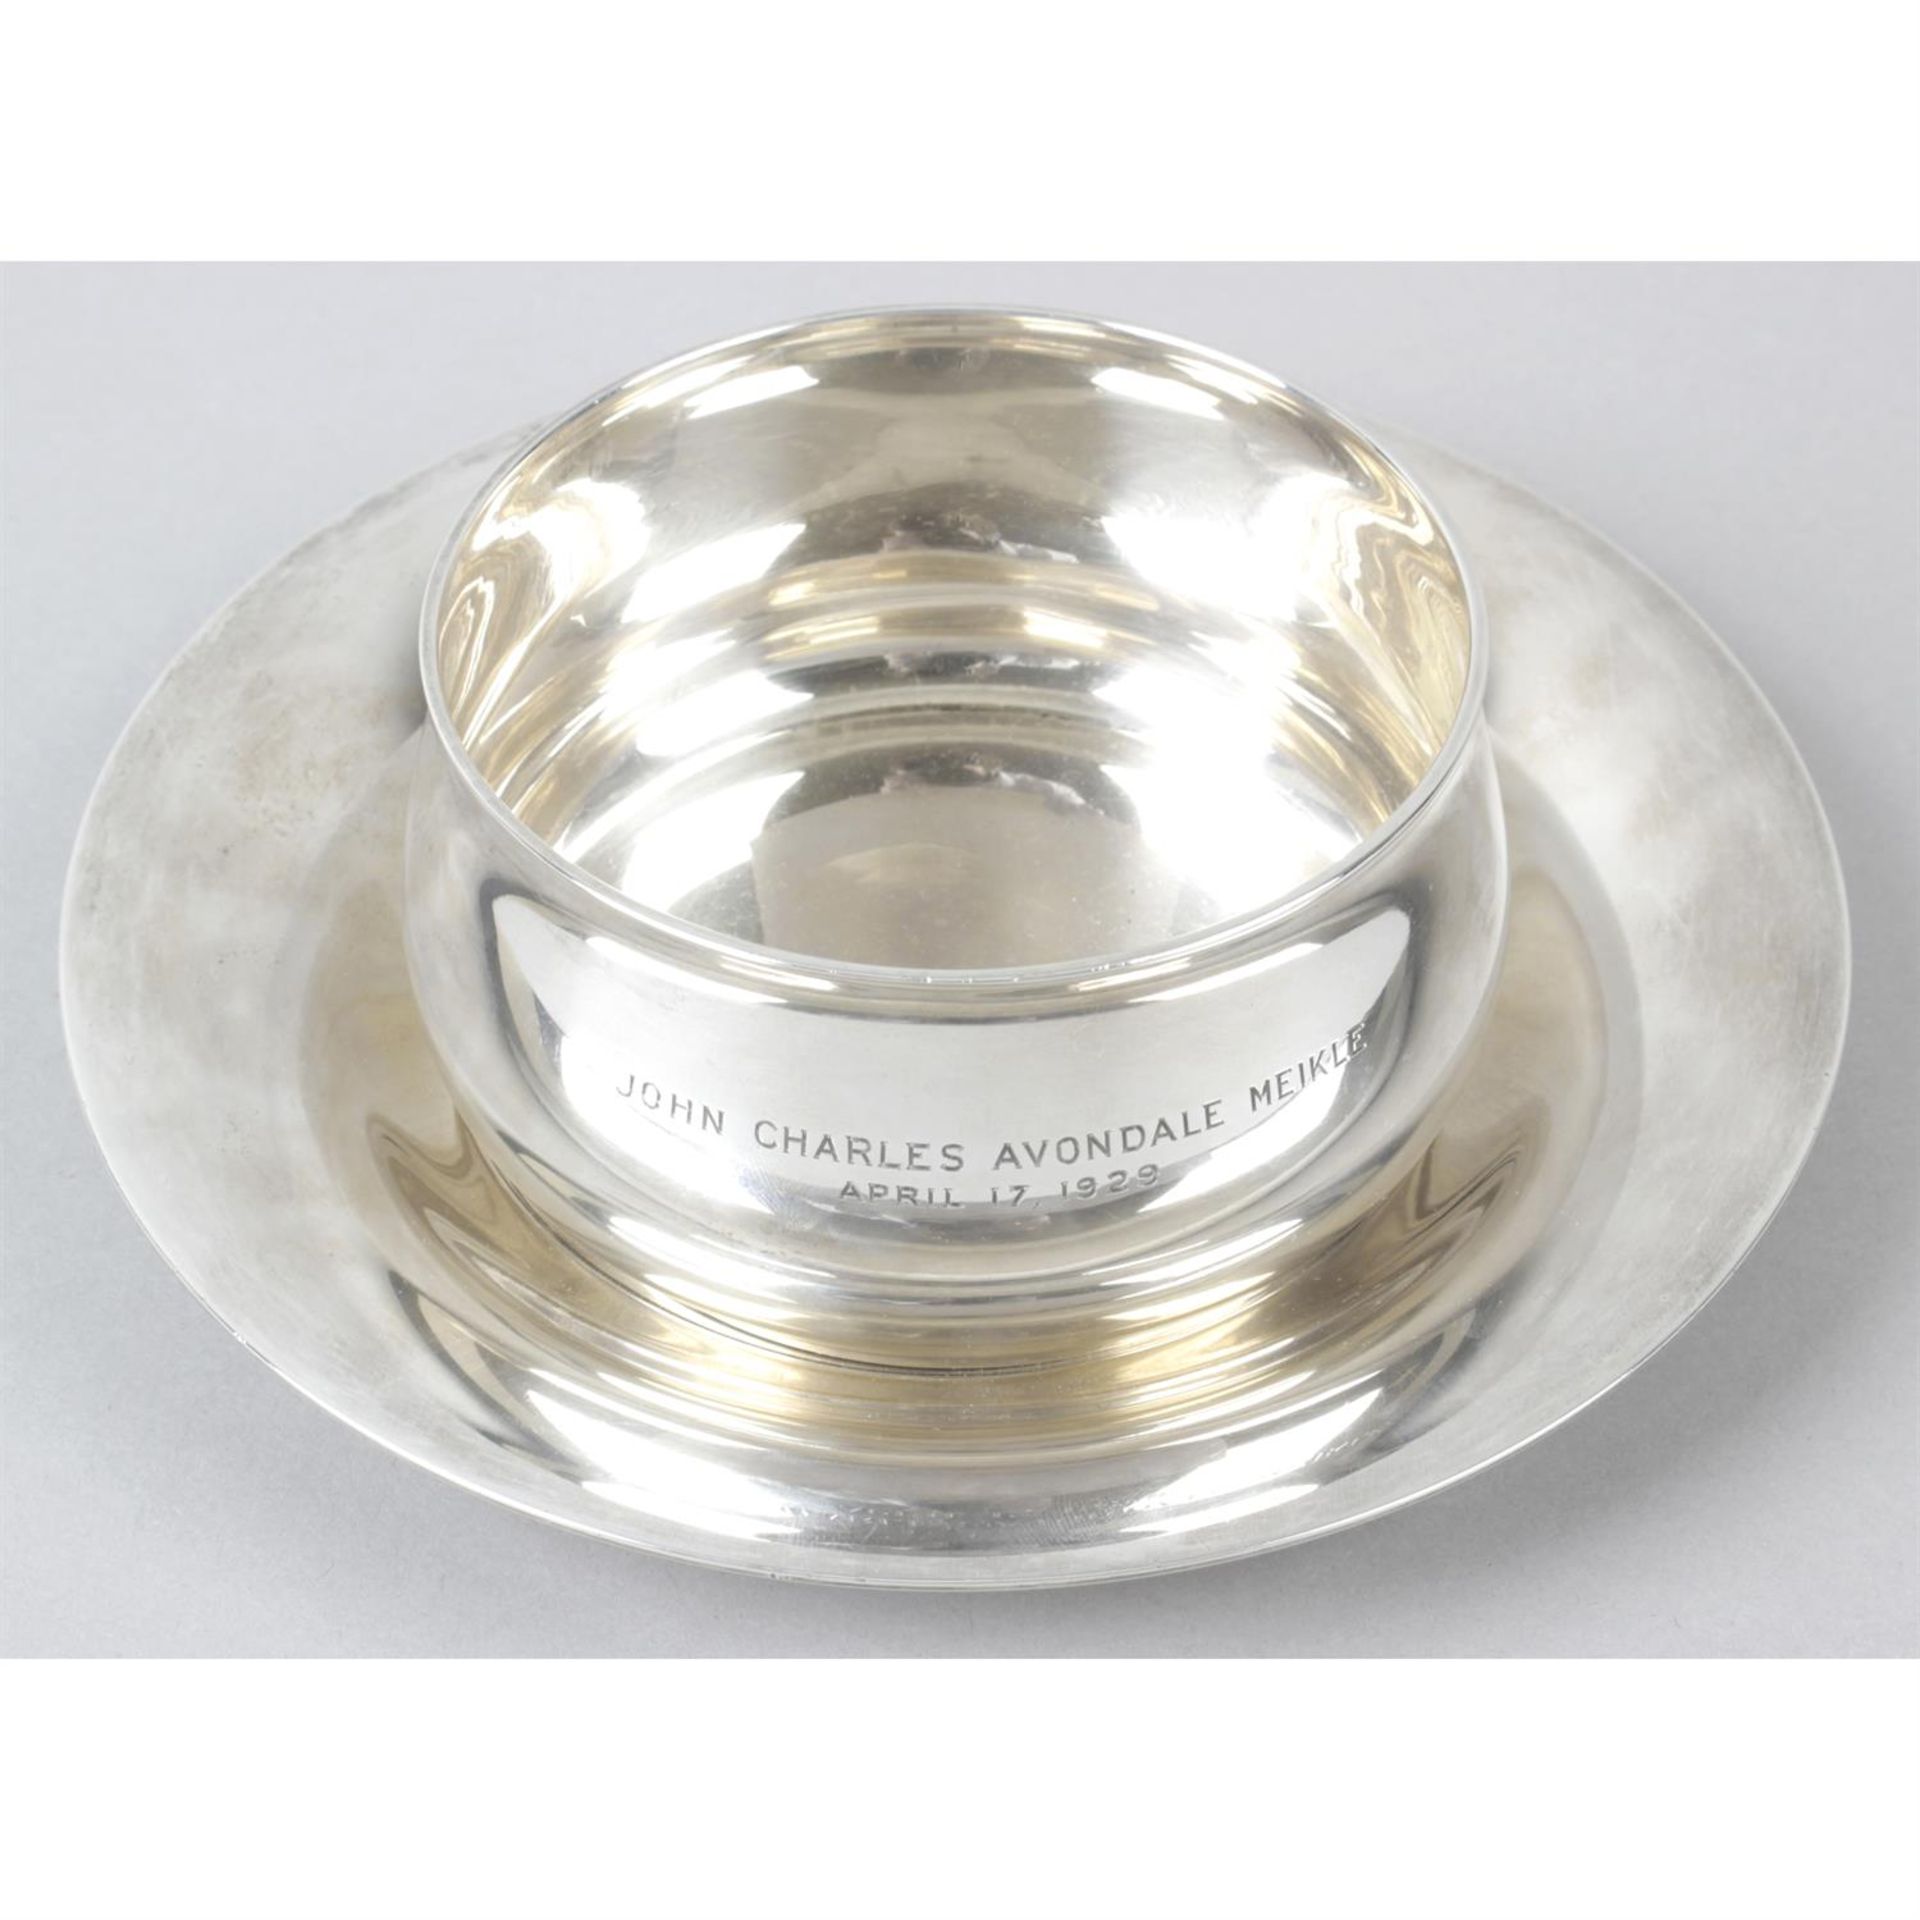 A Tiffany & Co sterling silver presentation bowl and dish.